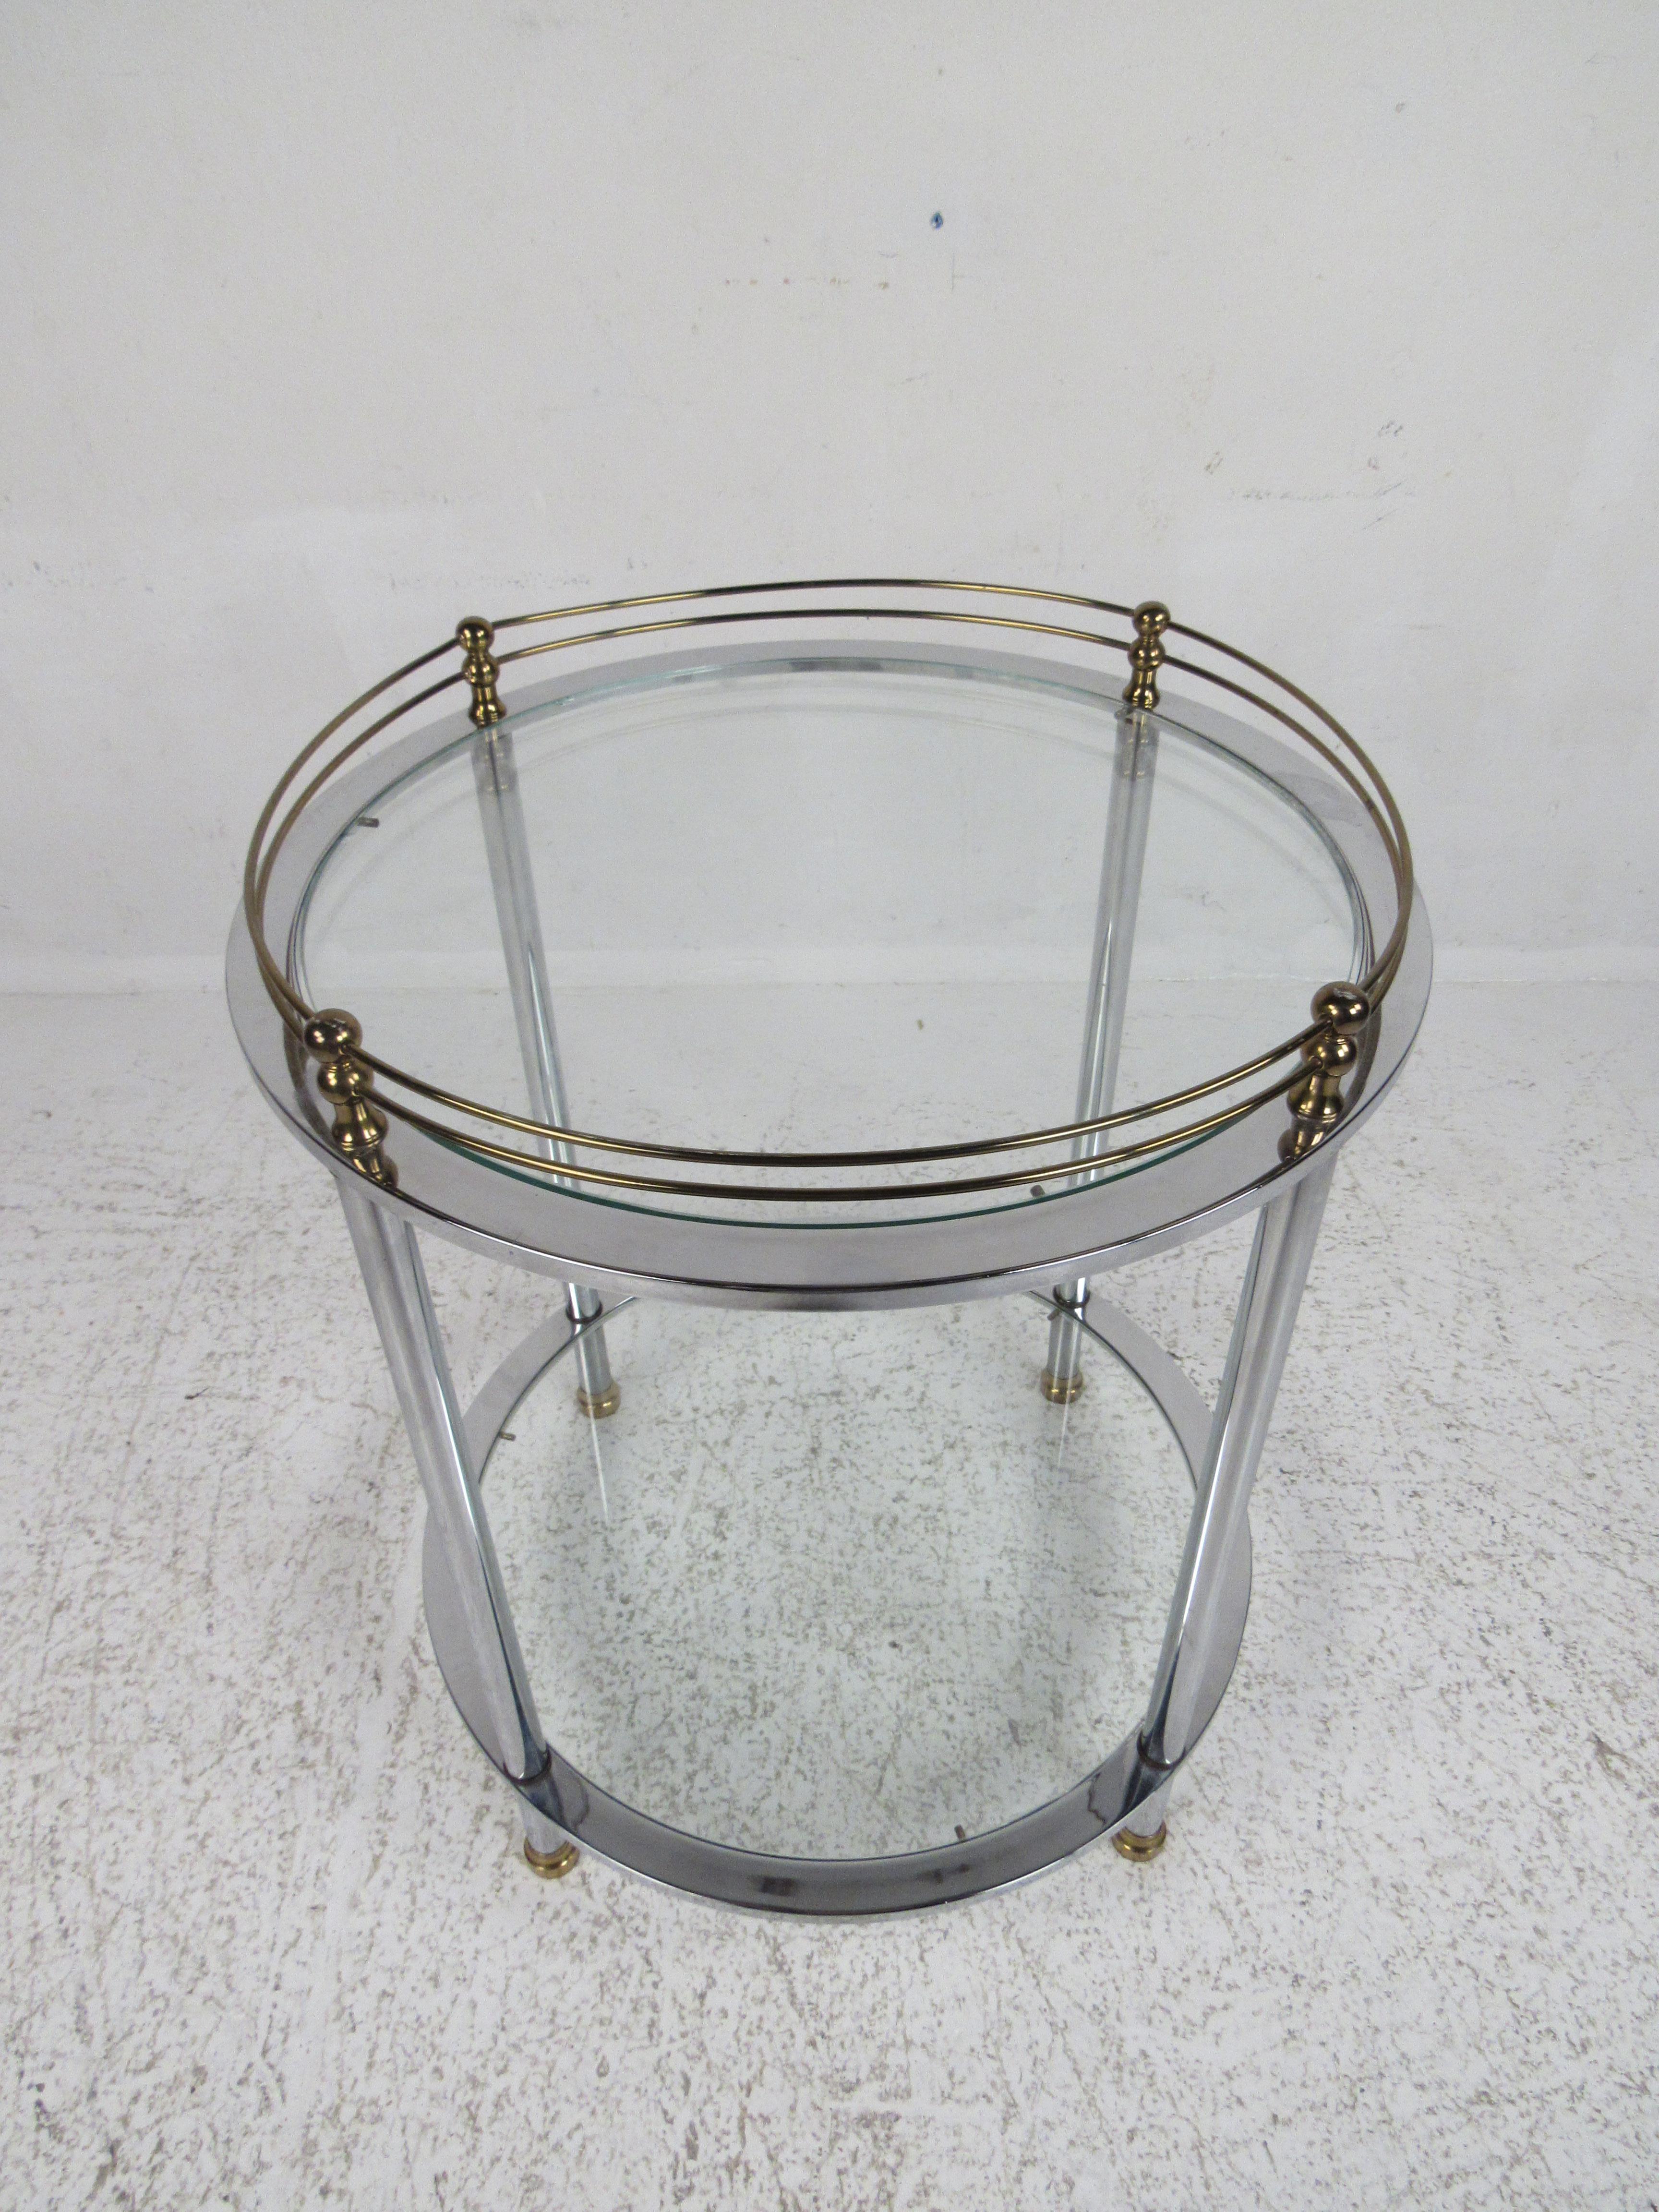 This stylish vintage modern side table features two tiers with glass inserts and a chrome frame. Brass fixtures support thin bent rods that wrap around the top. The unusual round shape allows this end table to fit into any setting. The circular